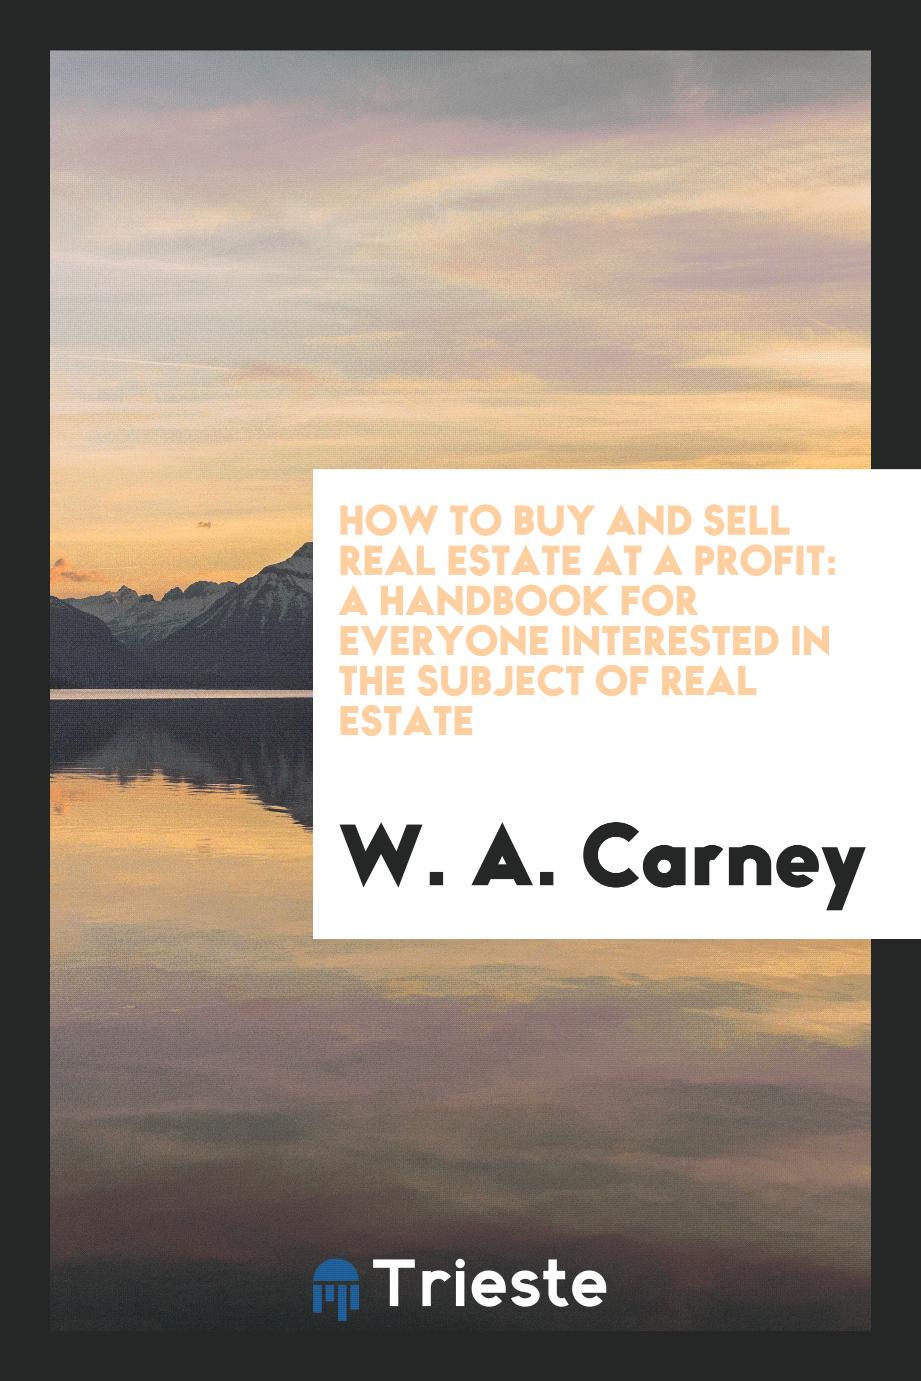 How to Buy and Sell Real Estate at a Profit: A Handbook for Everyone Interested in the Subject of Real Estate